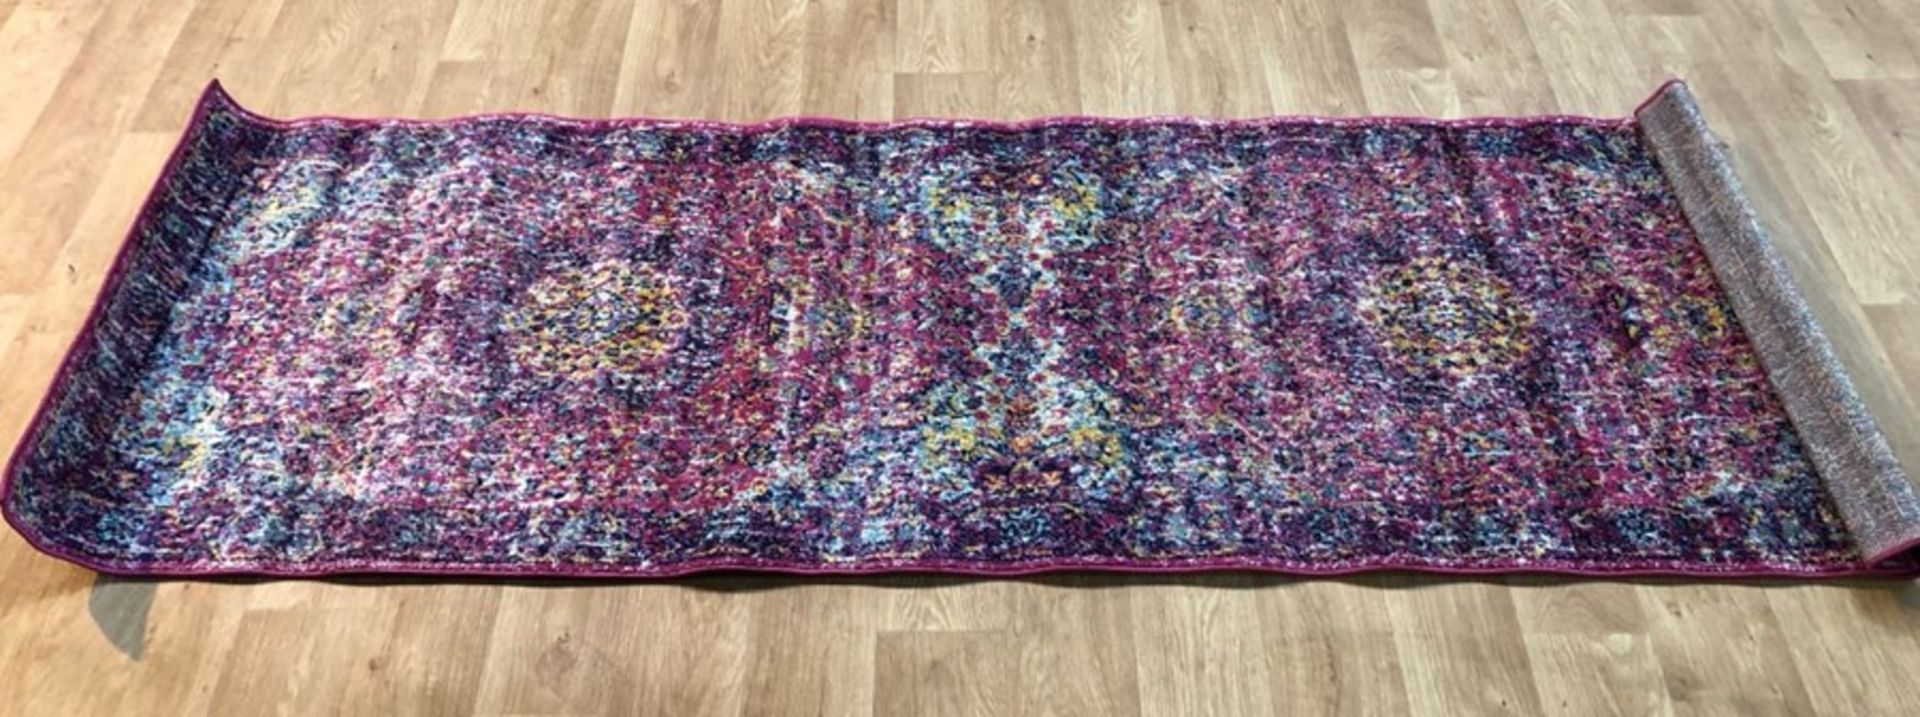 BARKSDALE BLOOMING PINK AREA RUNNER RUG / SIZE: 80 X 245CM BY LATITUDE VIVE